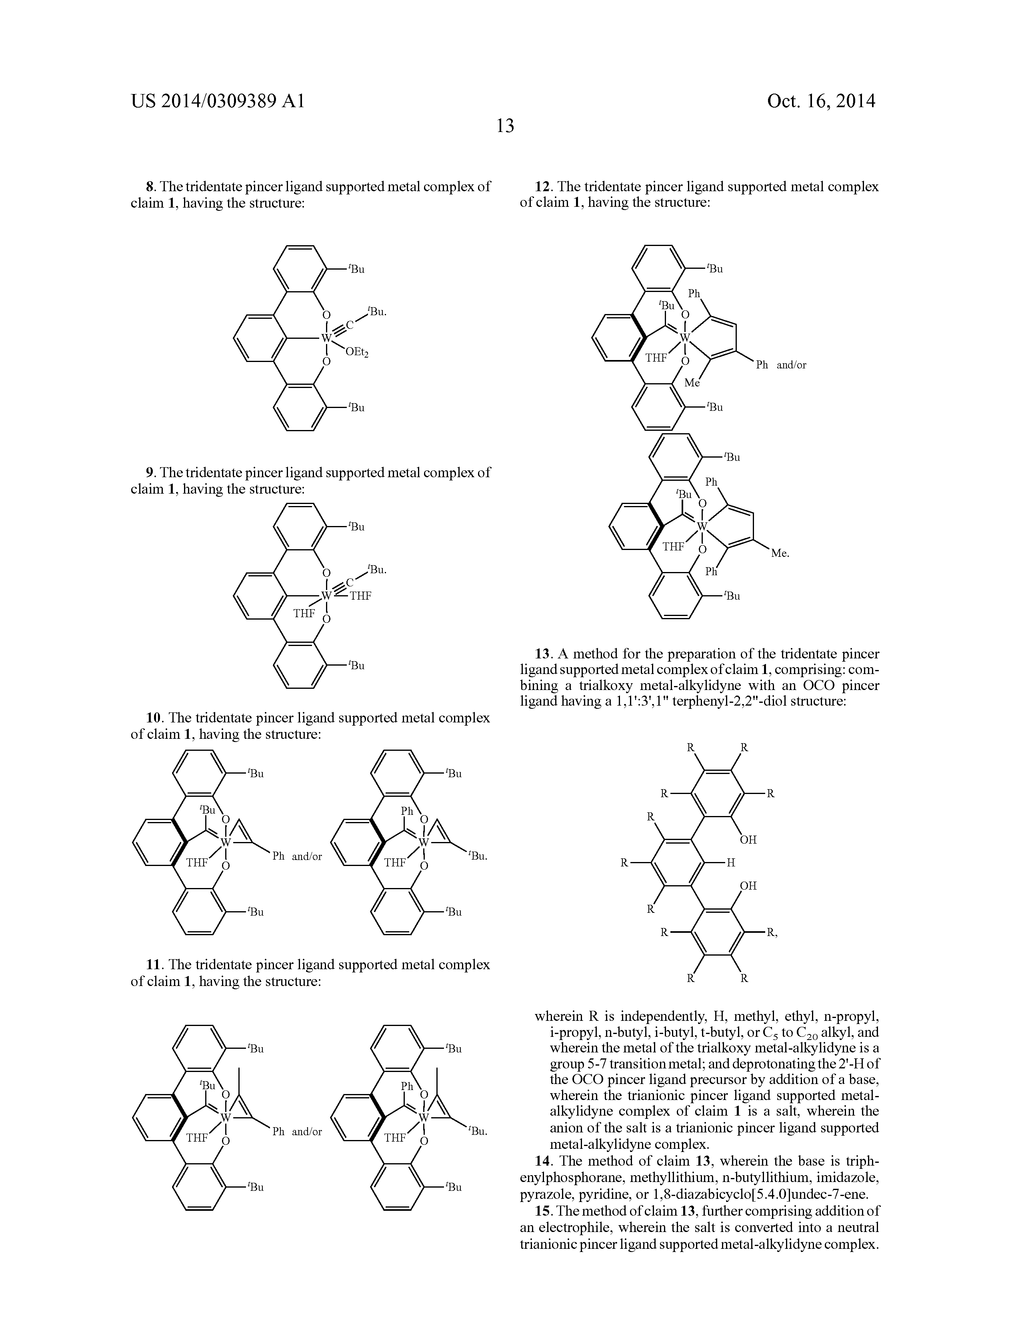 TRIDENTATE PINCER LIGAND SUPPORTED METAL-ALKYLIDYNE AND     METALLACYCLOALKYLENE COMPLEXES FOR ALKYNE POLYMERIZATION - diagram, schematic, and image 28